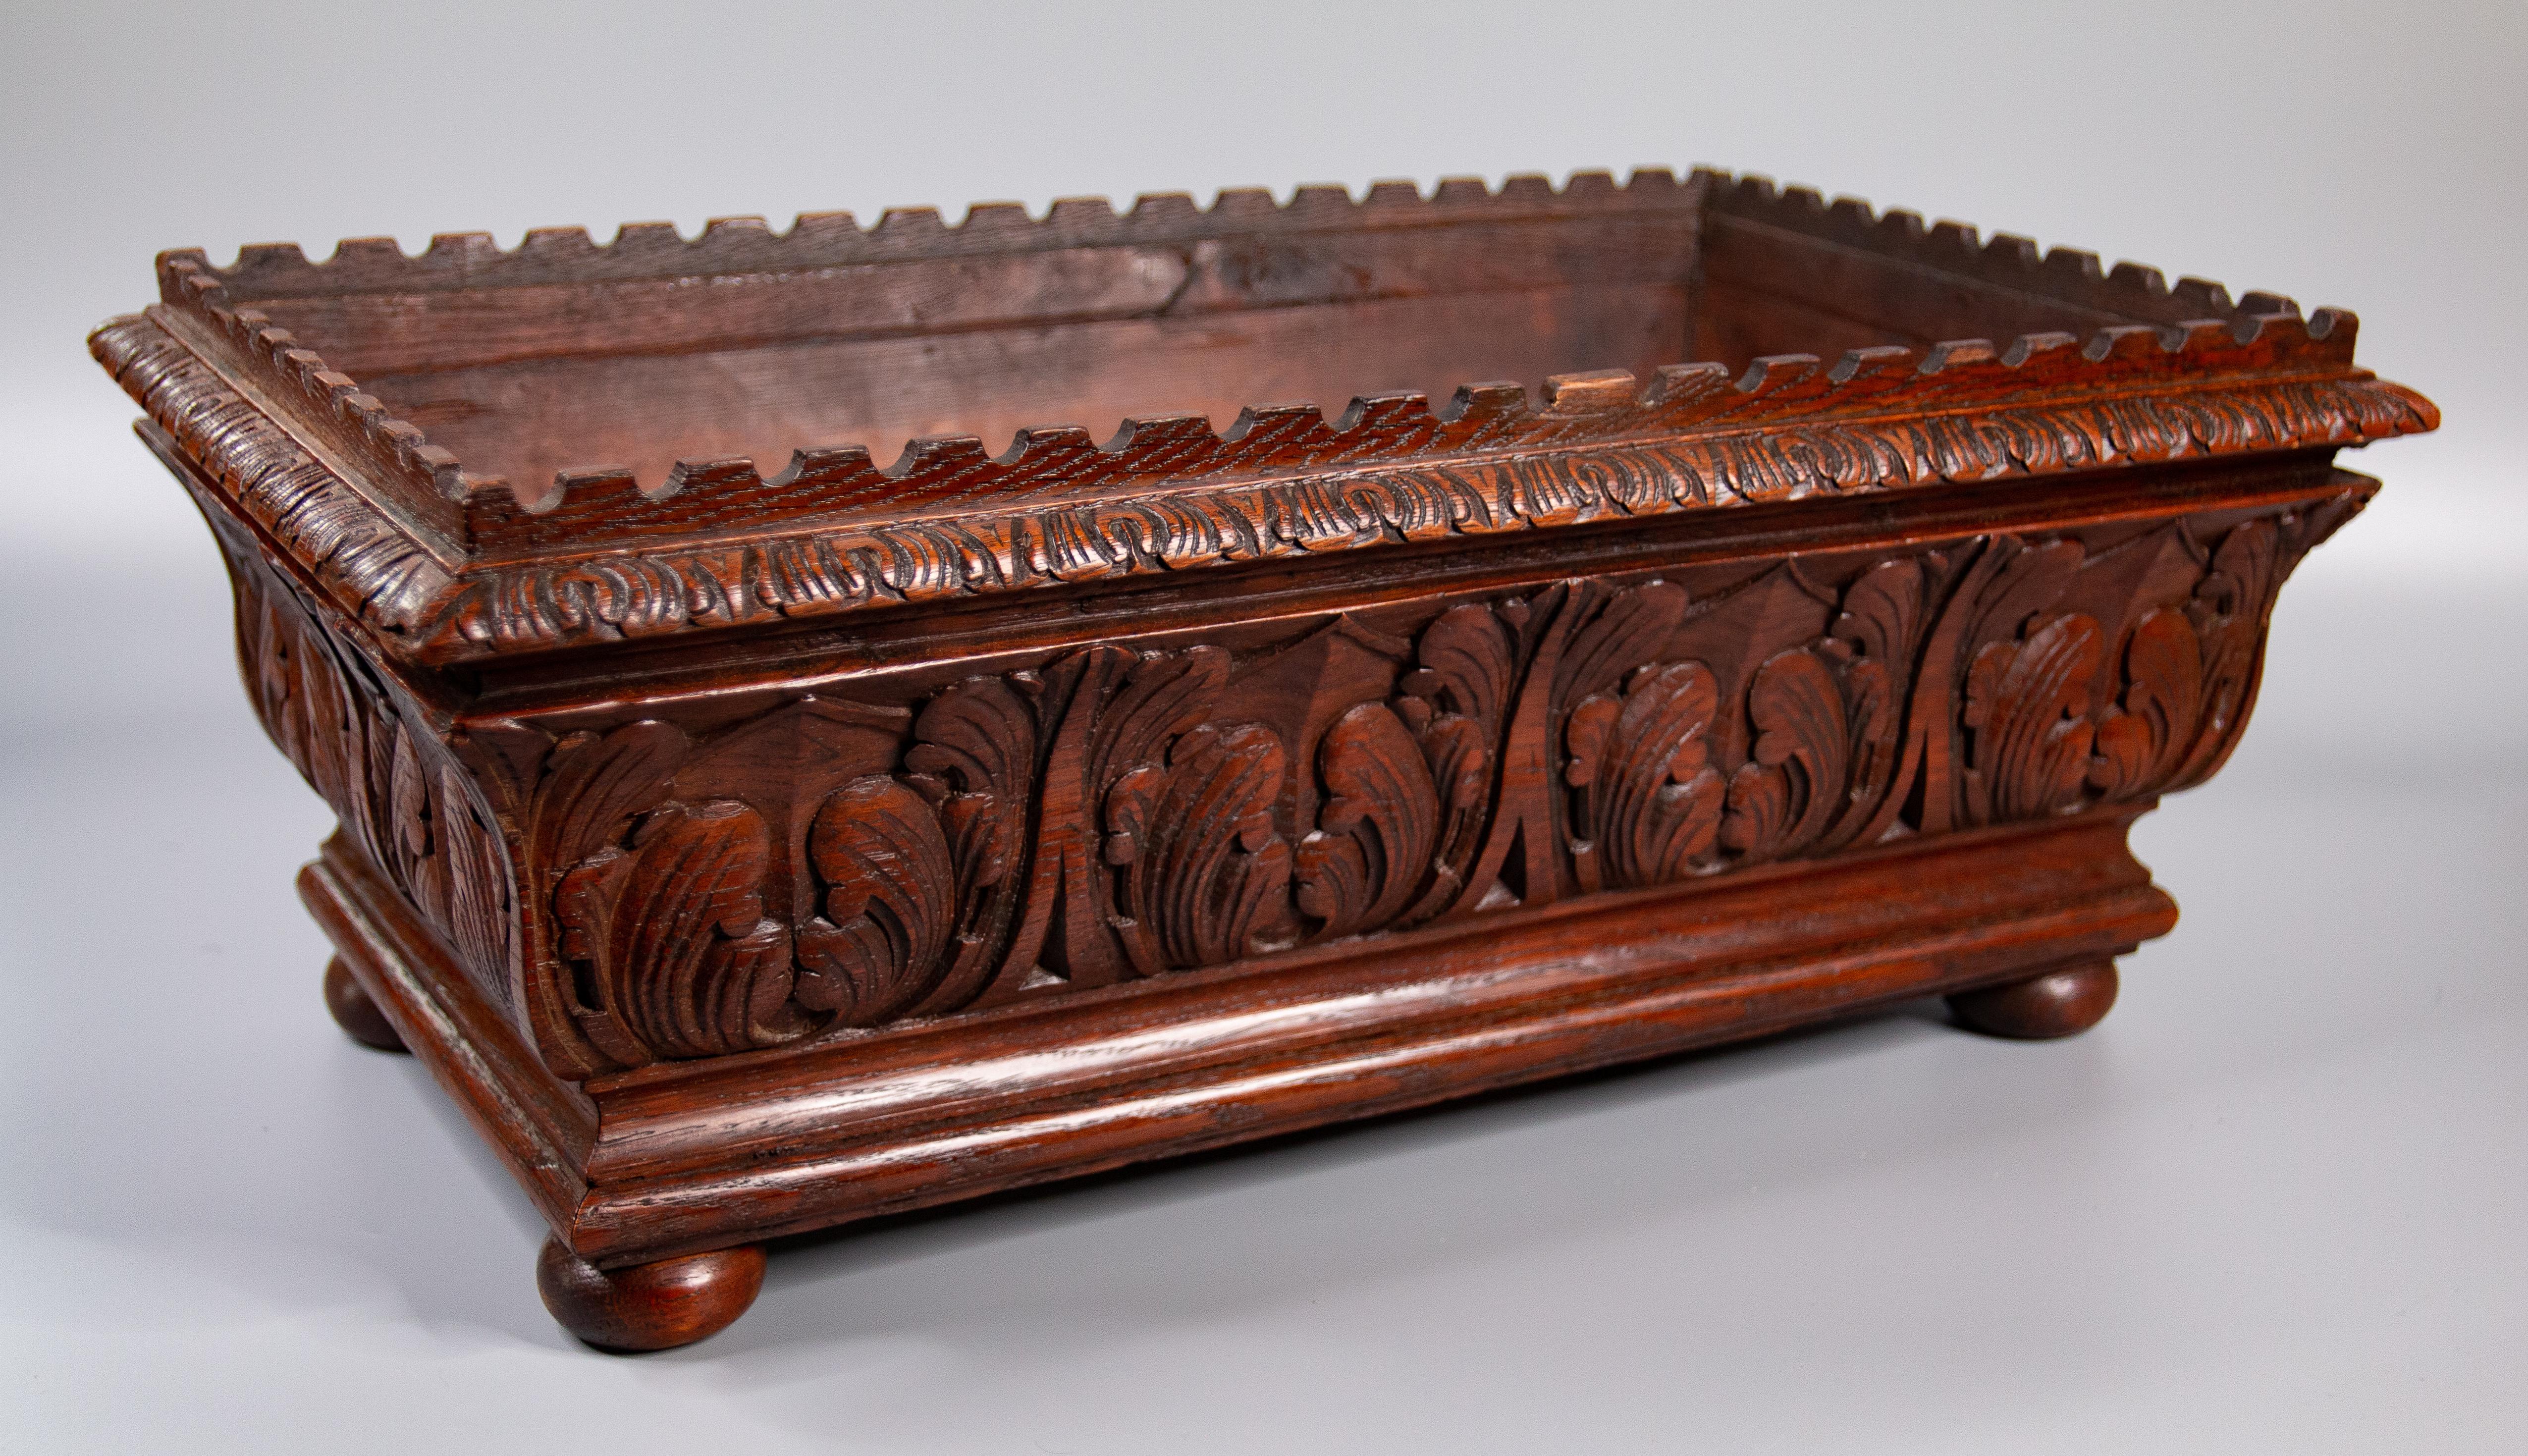 Antique 19th-Century French Mahogany Carved Jardiniere Planter In Good Condition For Sale In Pearland, TX